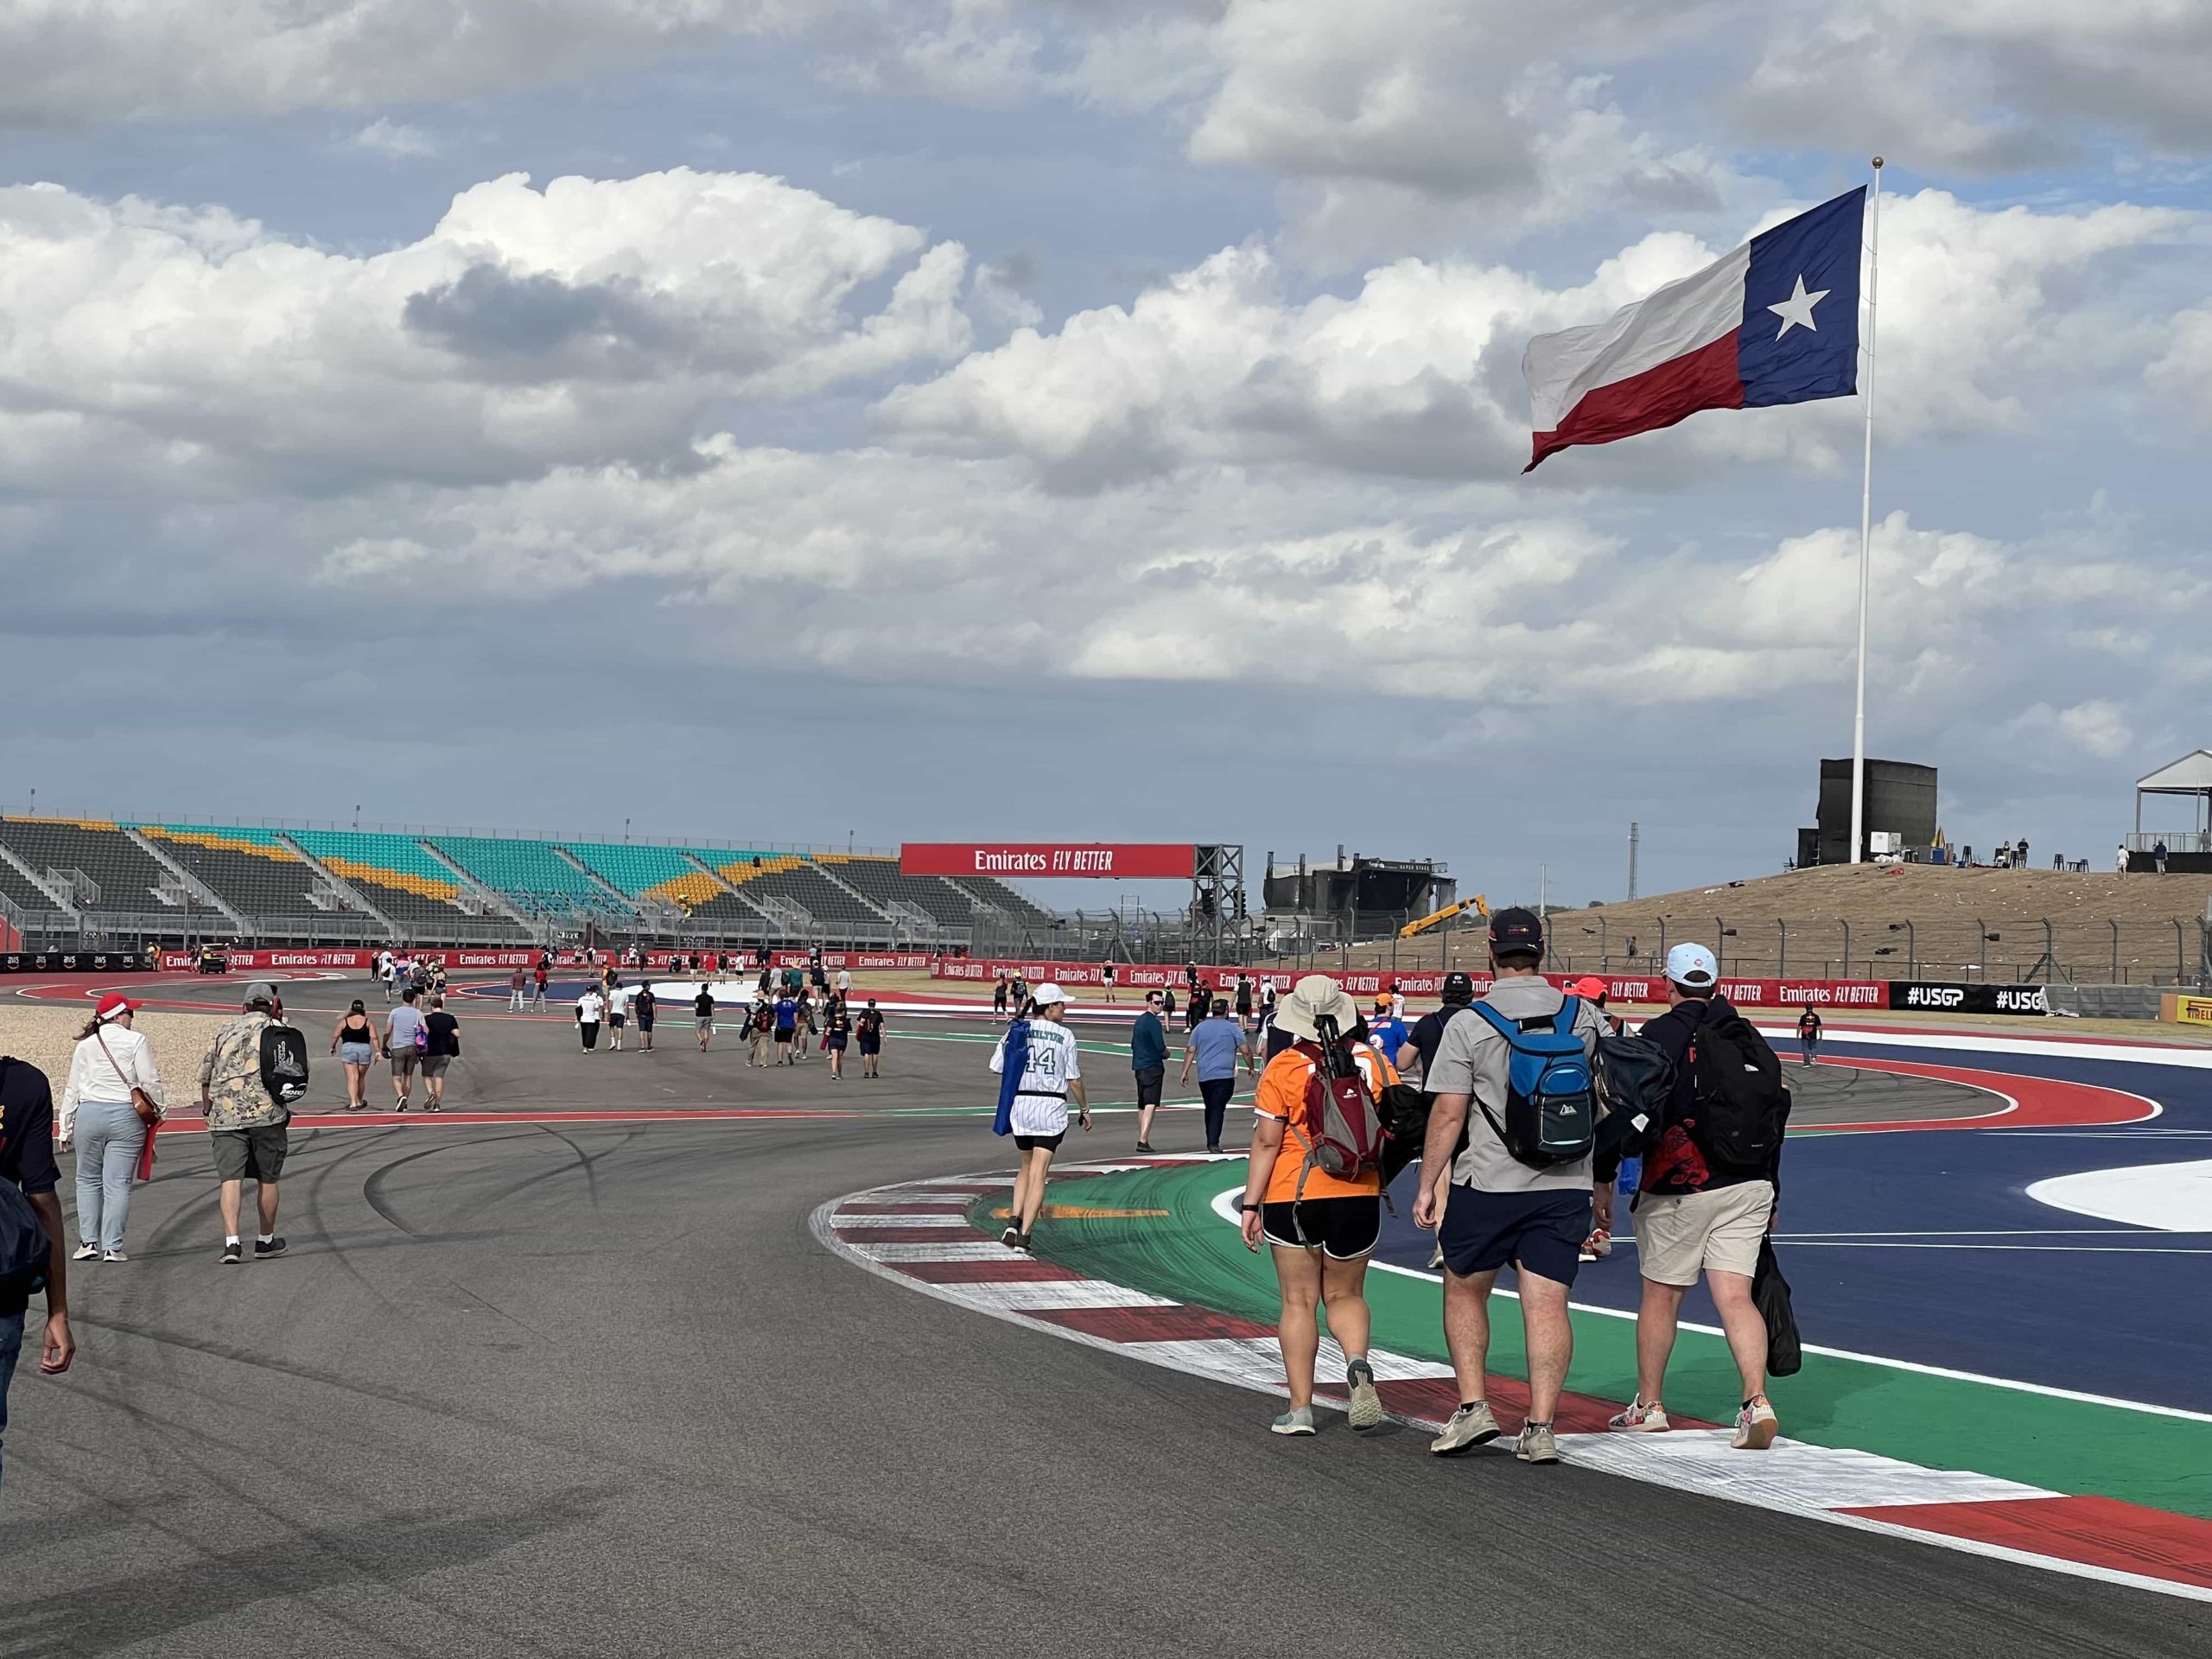 A view of Turns 6, 7, and 8 at COTA, with fans exploring the track after a race